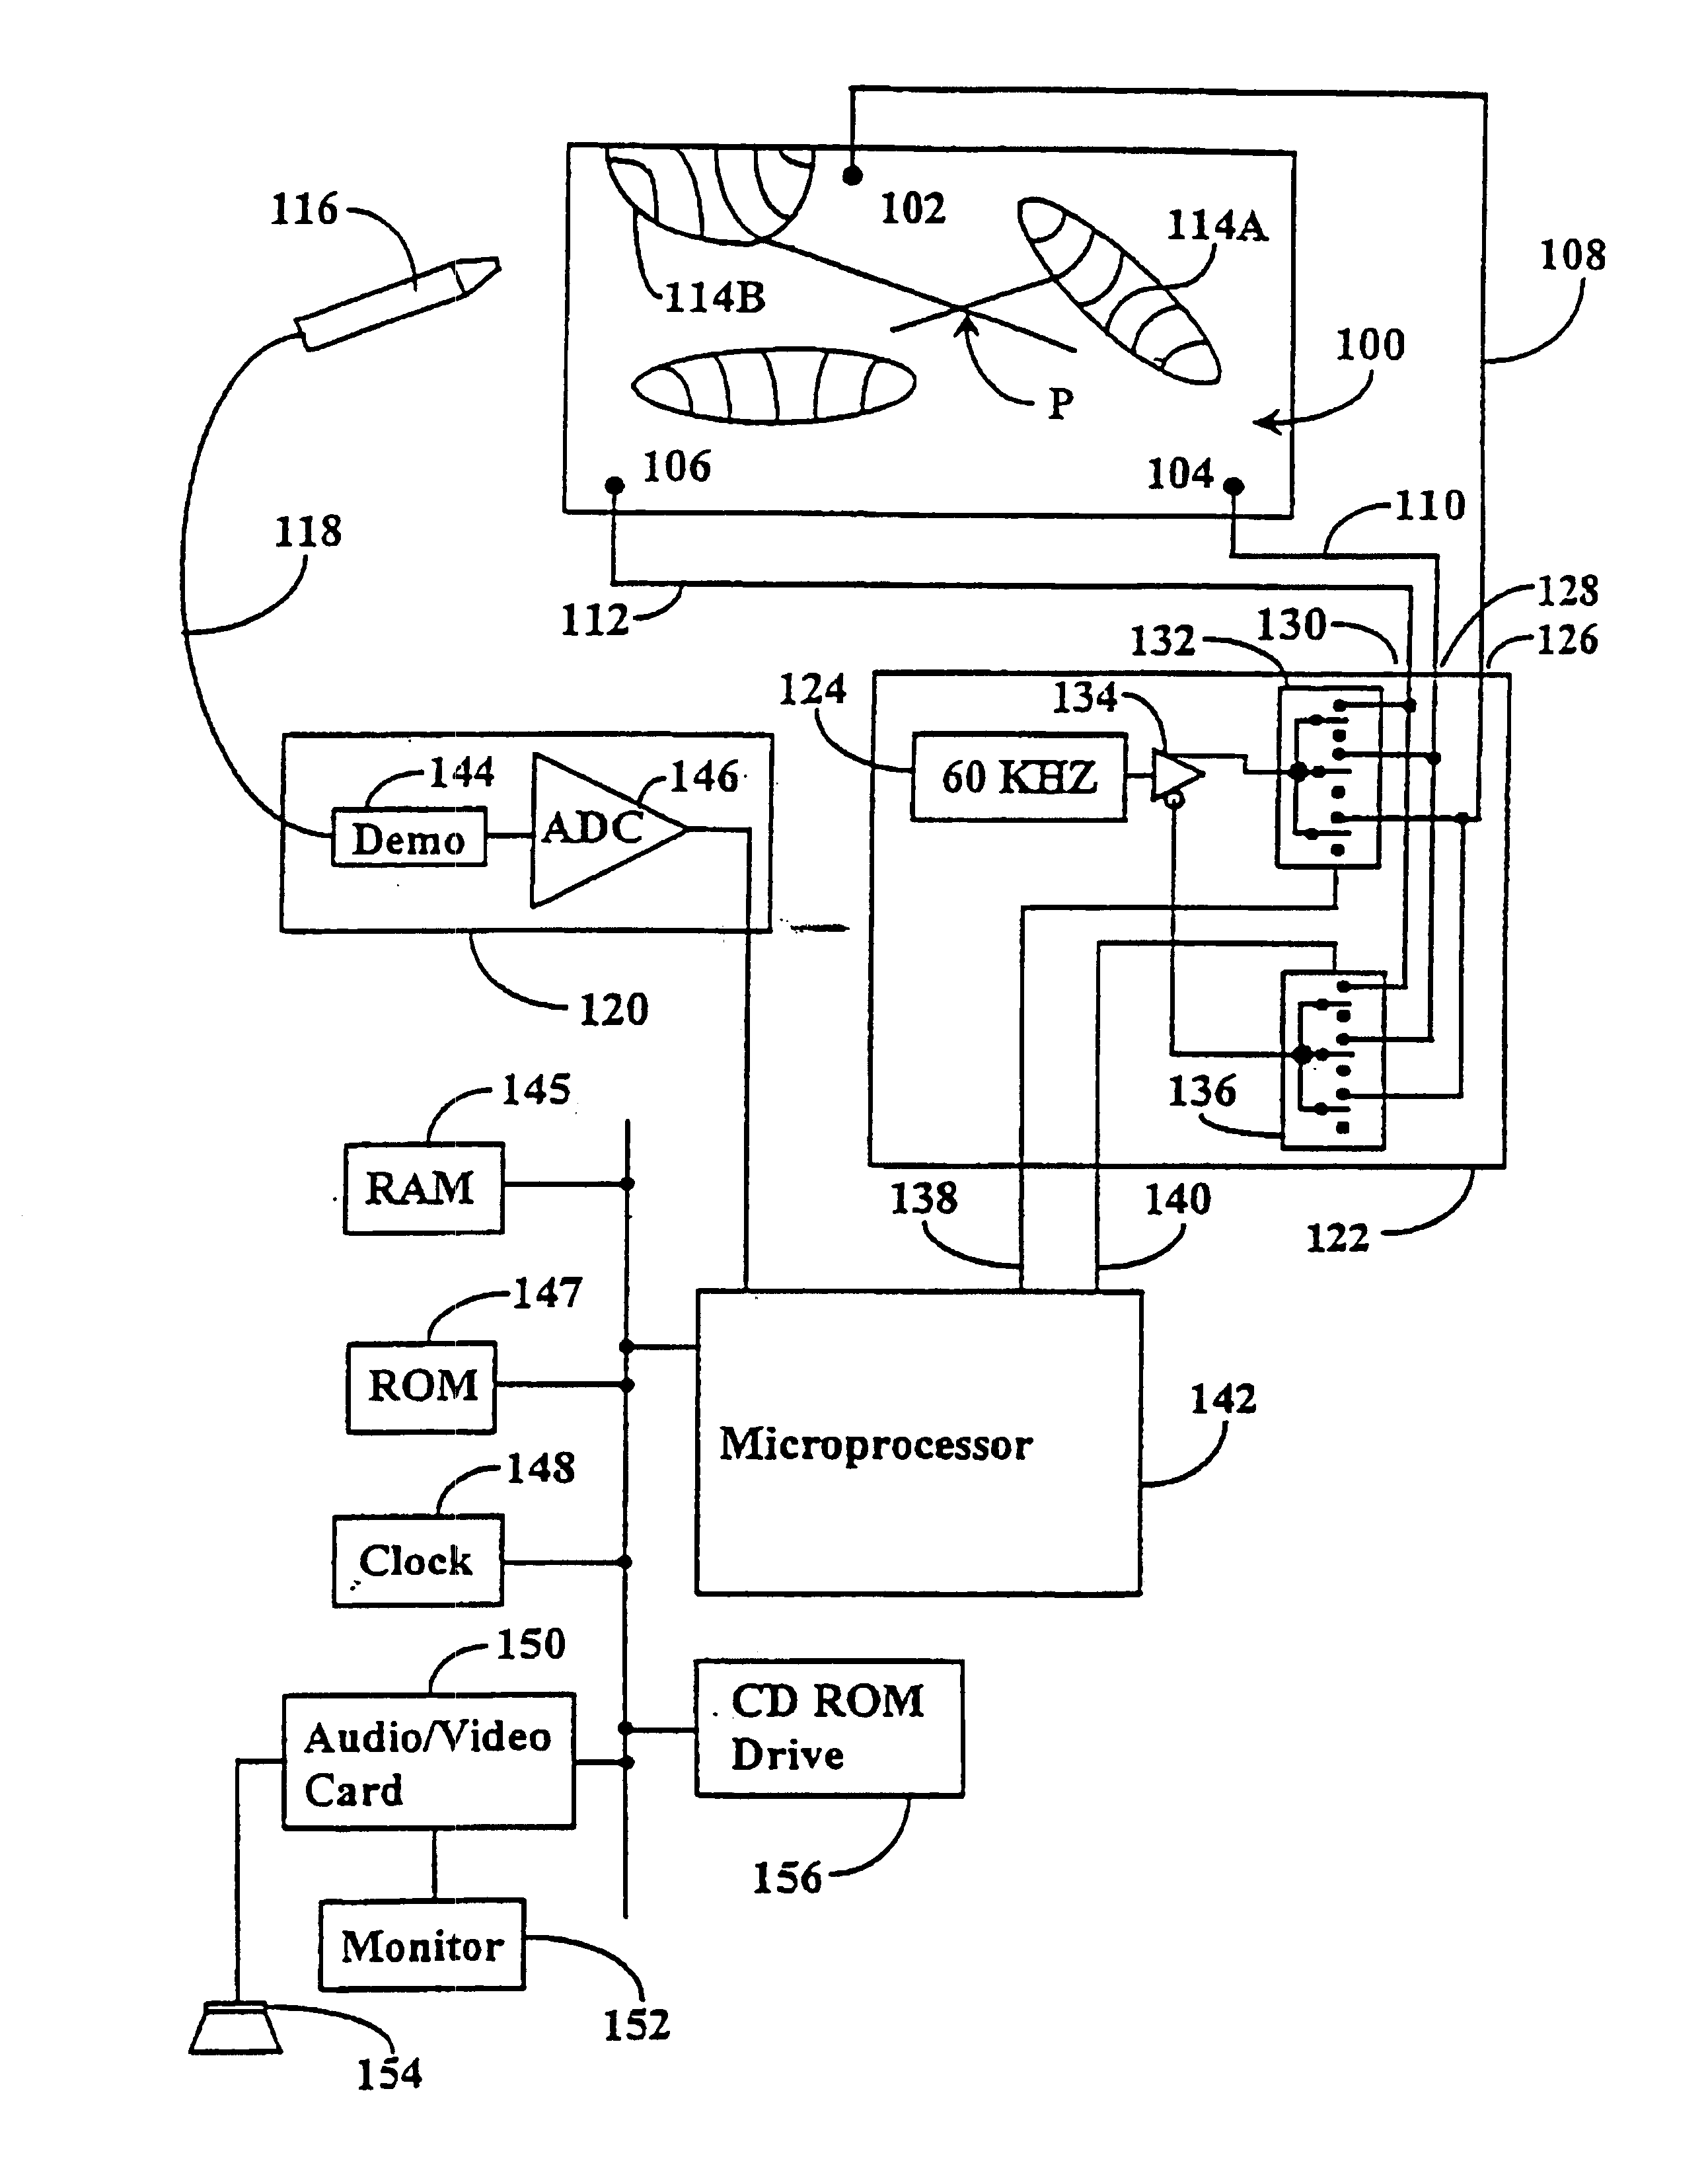 Surface position location system and method